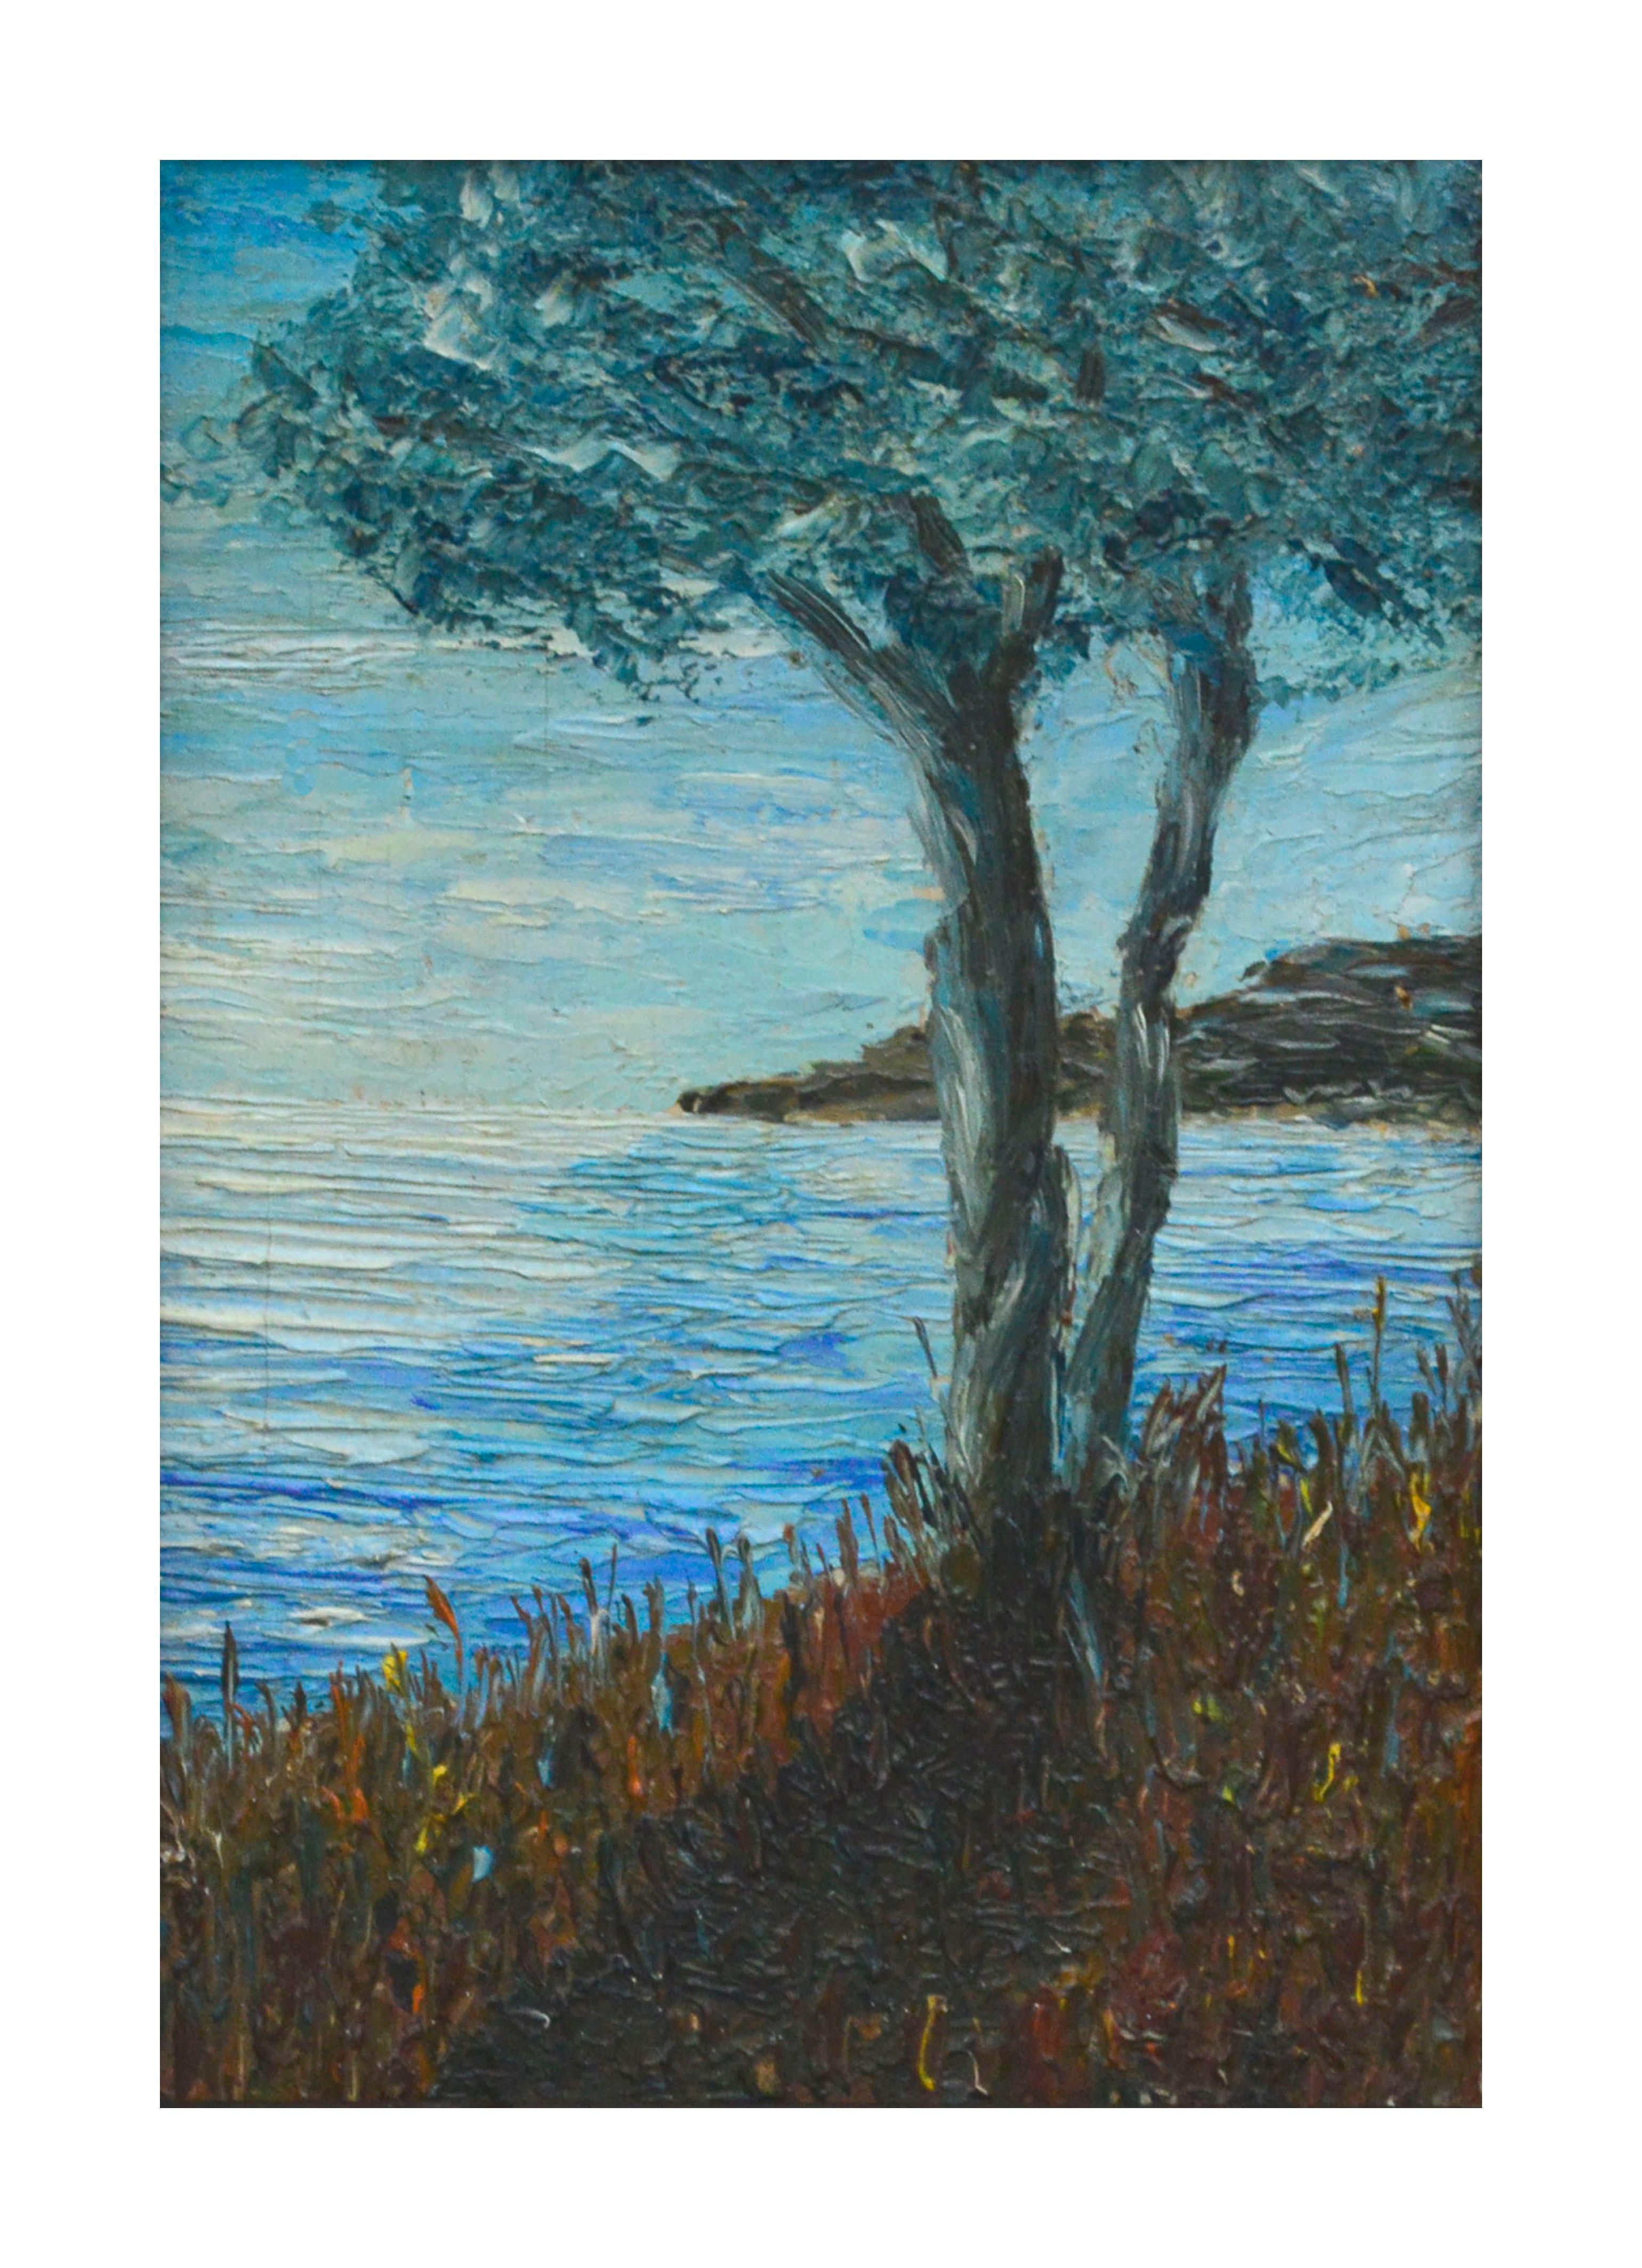 Tree by the Bay, Small-Scale Mid Century Coastal Landscape  - Painting by Unknown